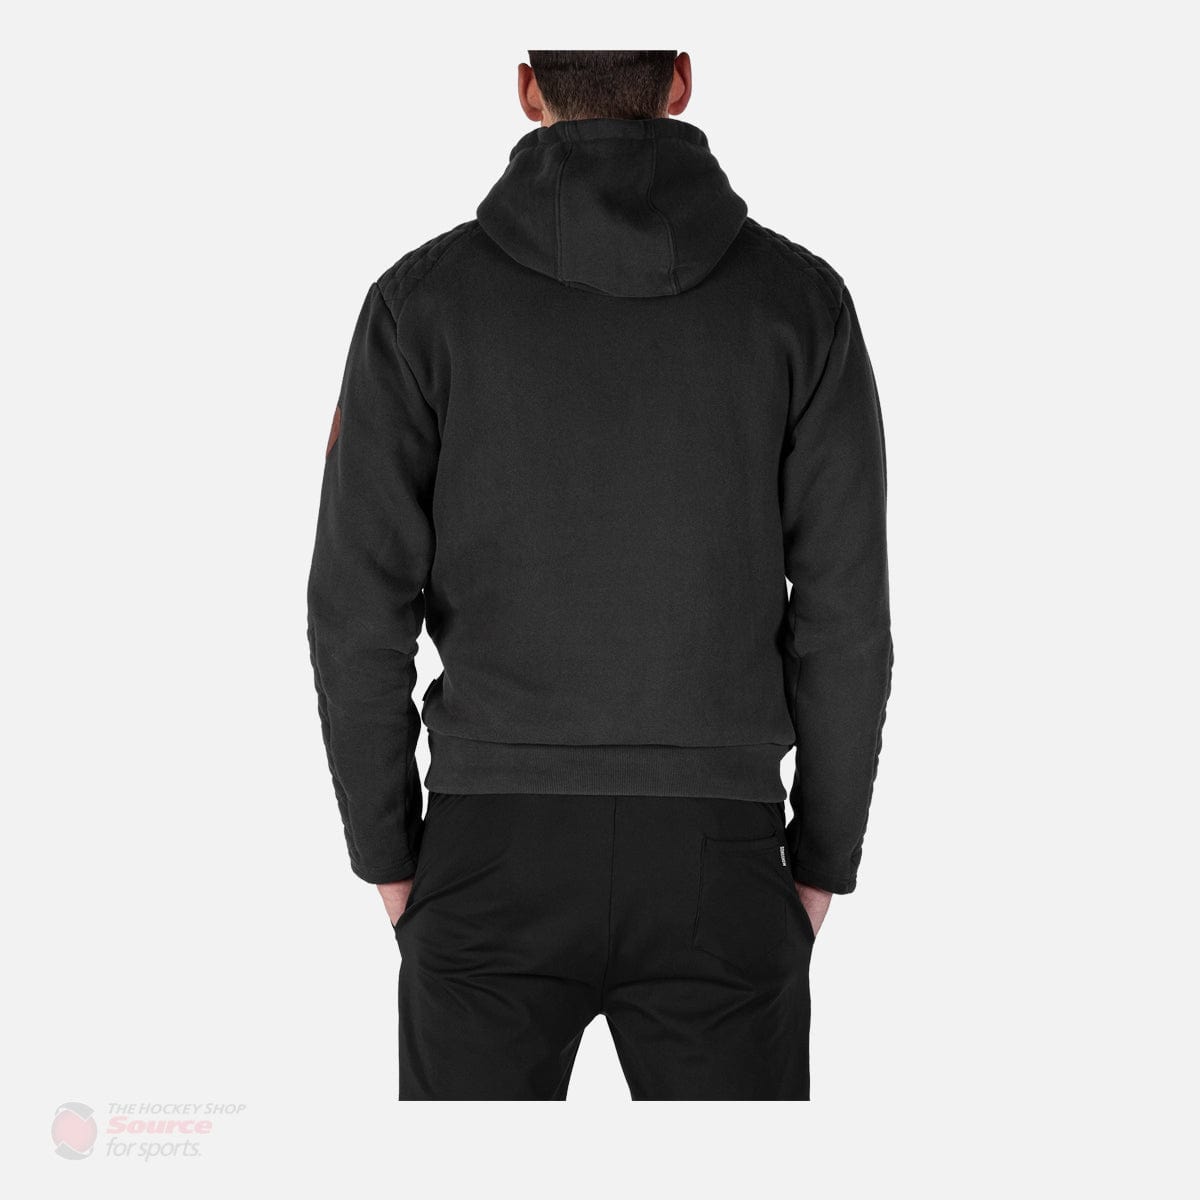 Gongshow Hockey Another Gear Mens Hoody